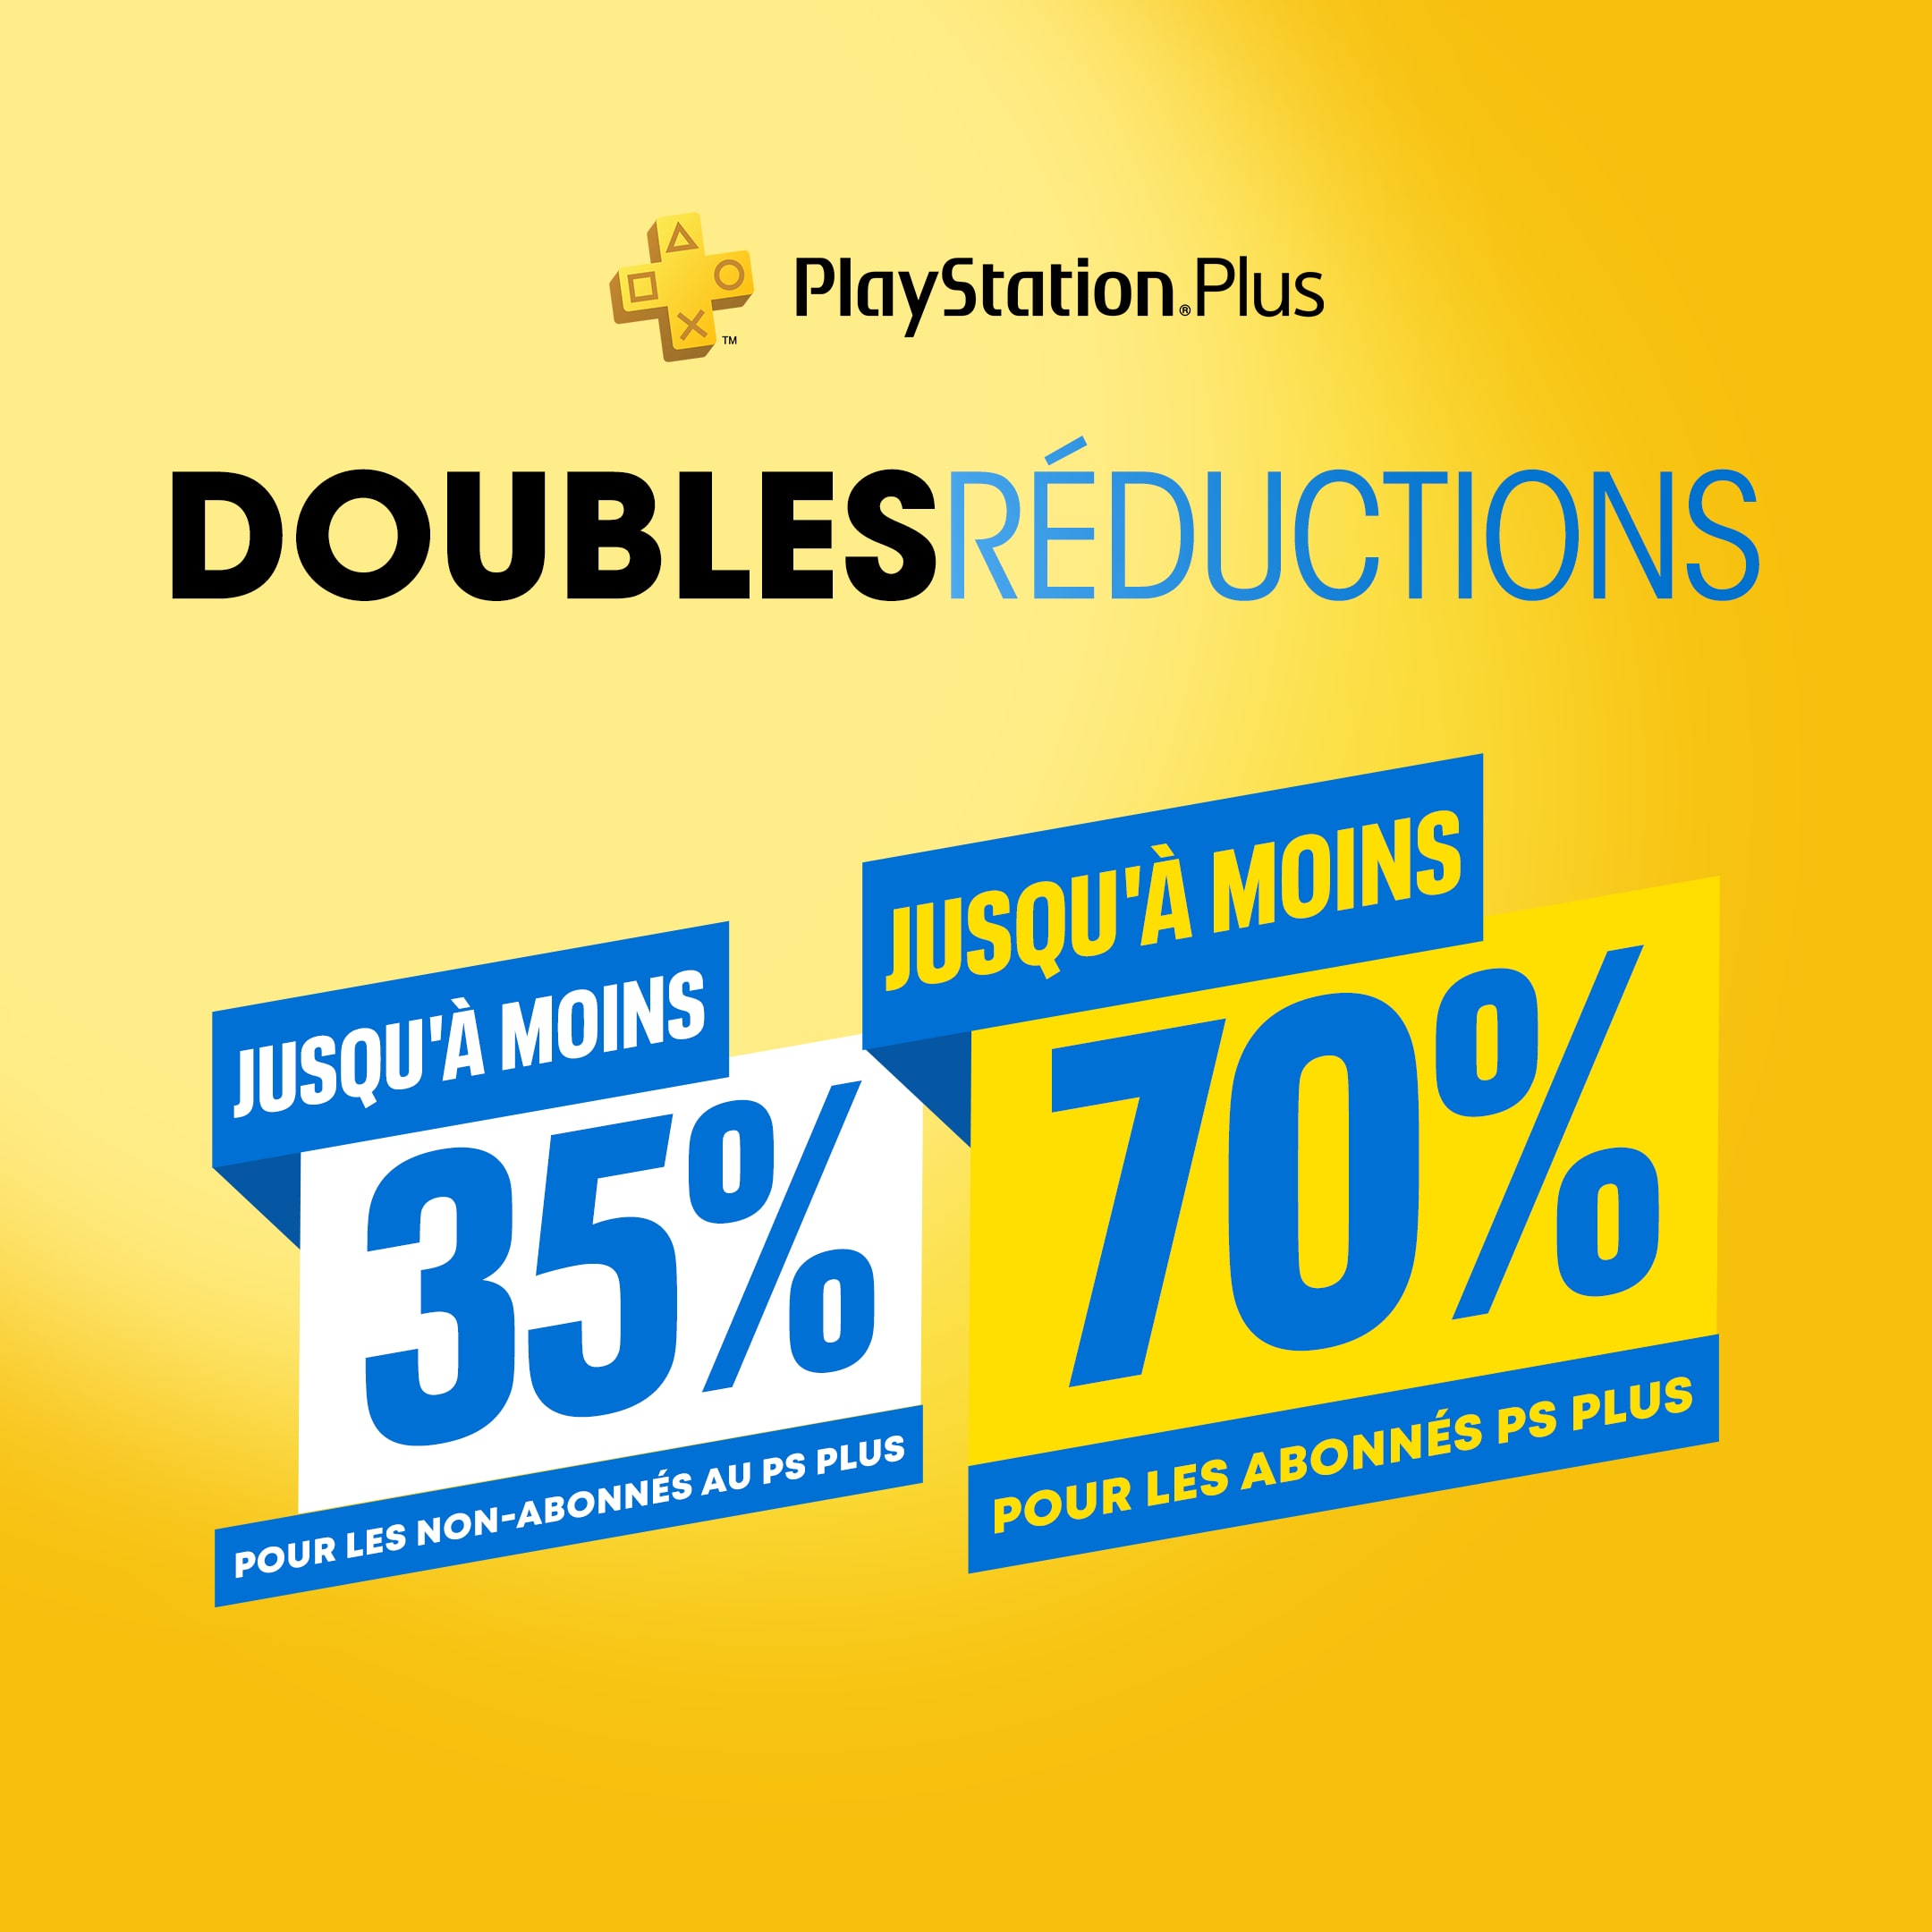 playstation store luxembourg